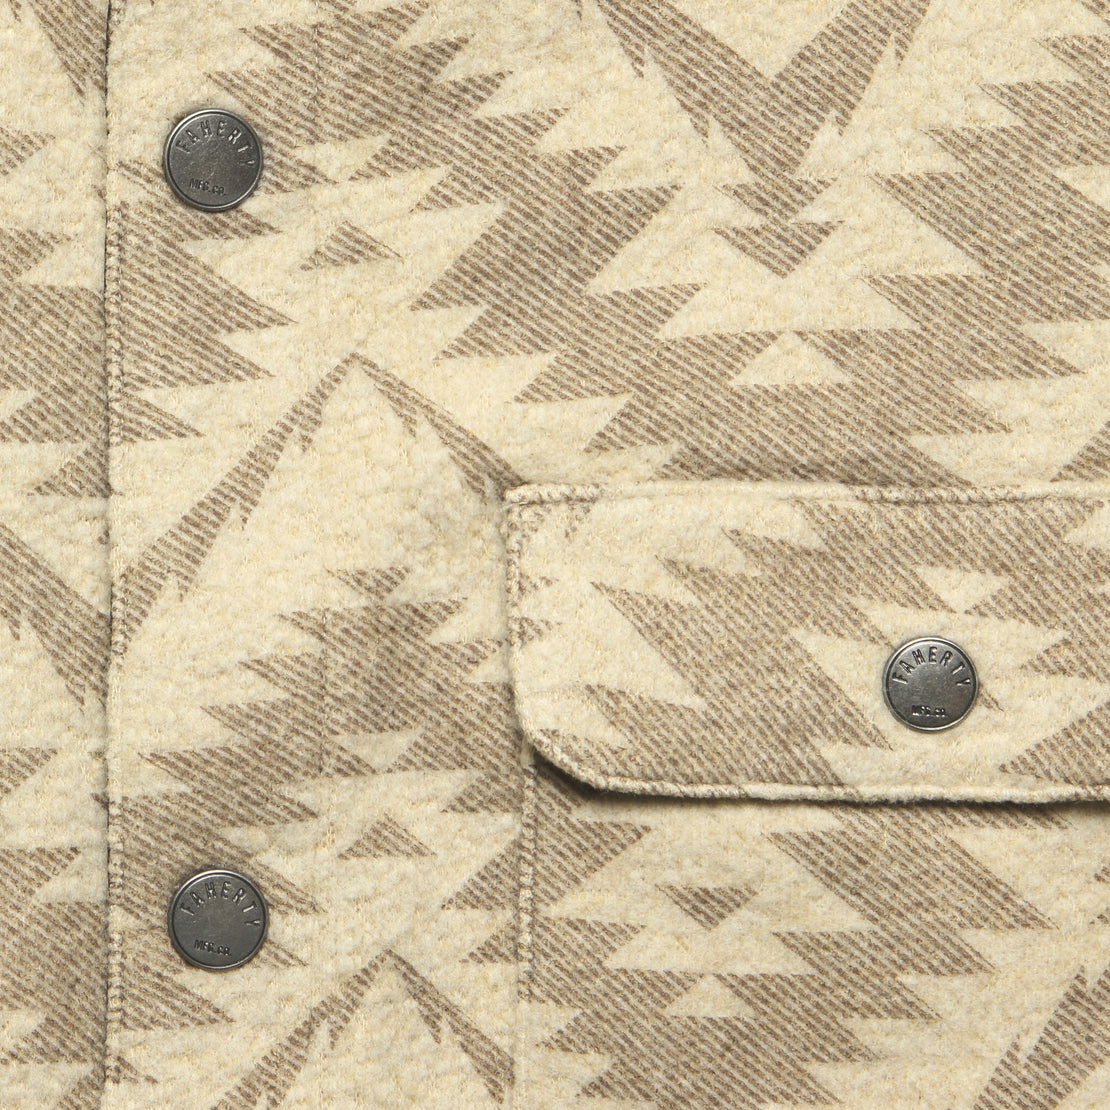 Monument Valley CPO Jacket - Sandstone - Faherty - STAG Provisions - Outerwear - Shirt Jacket